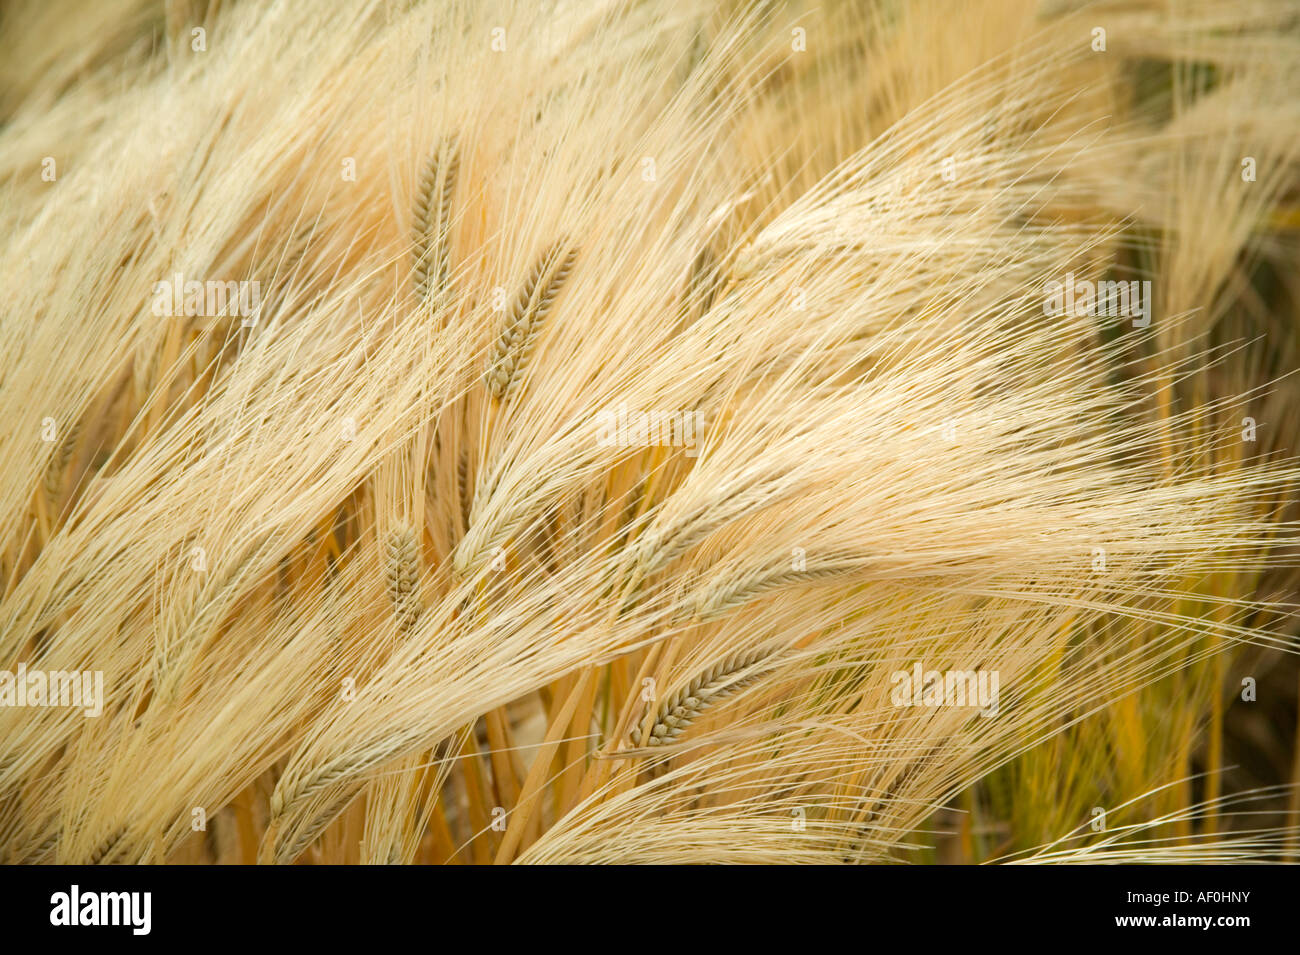 Mature four row barley growing in field, Oregon Stock Photo